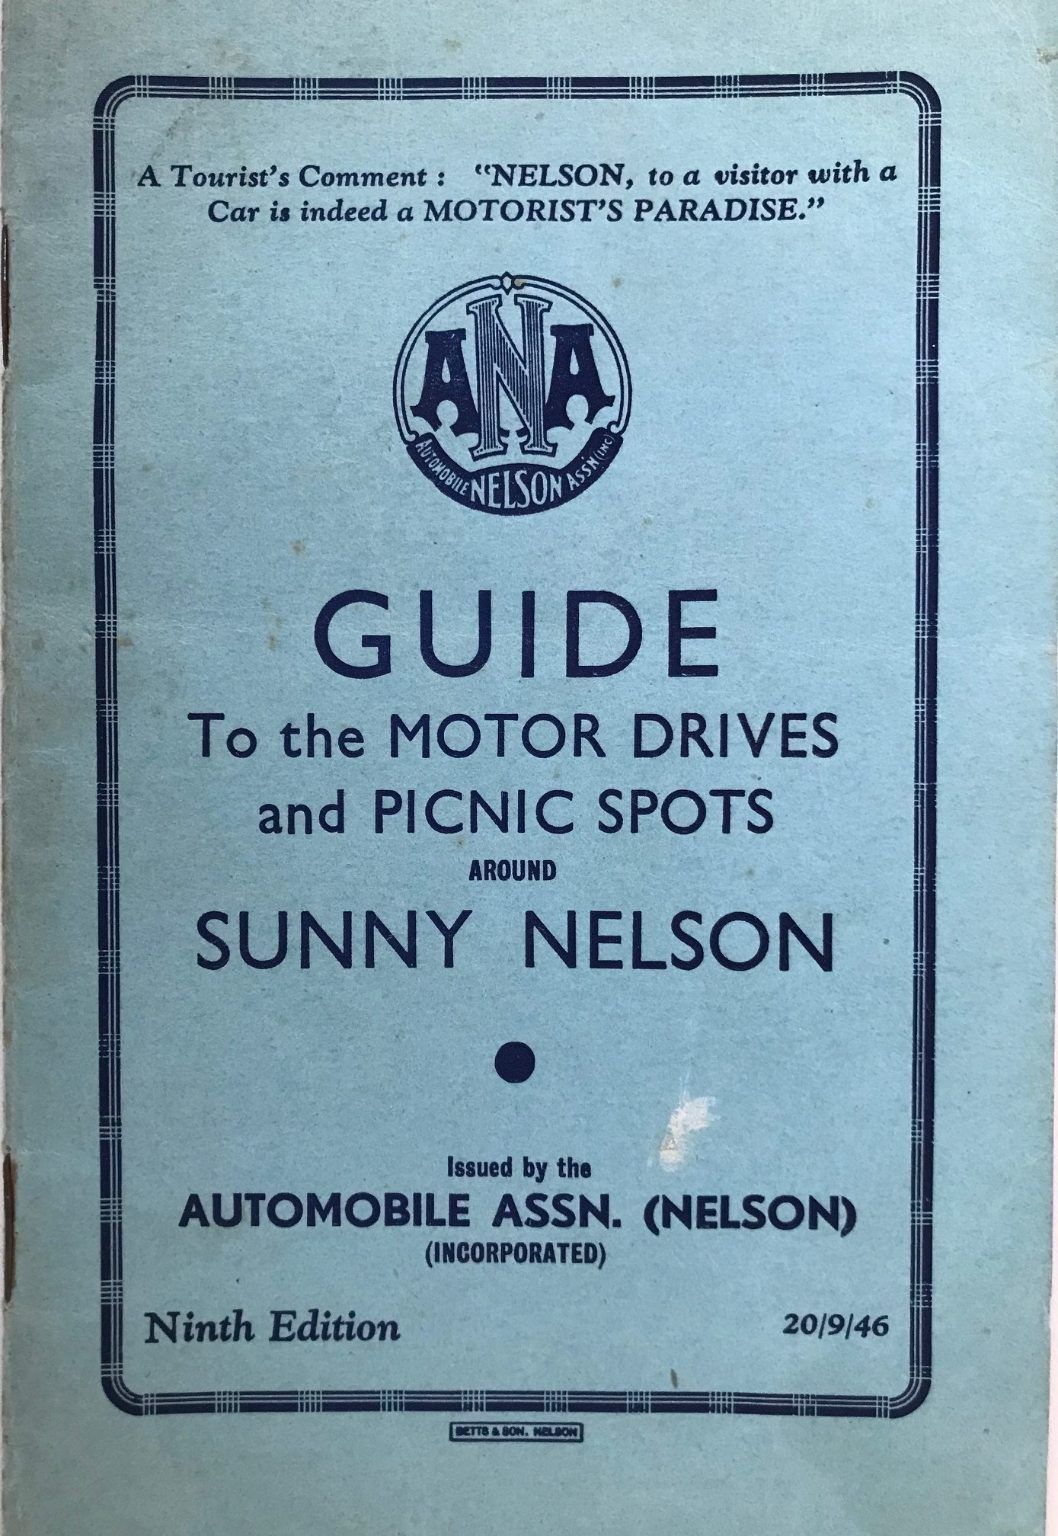 GUIDE: To the Motor Drives and Picnic Spots around Nelson